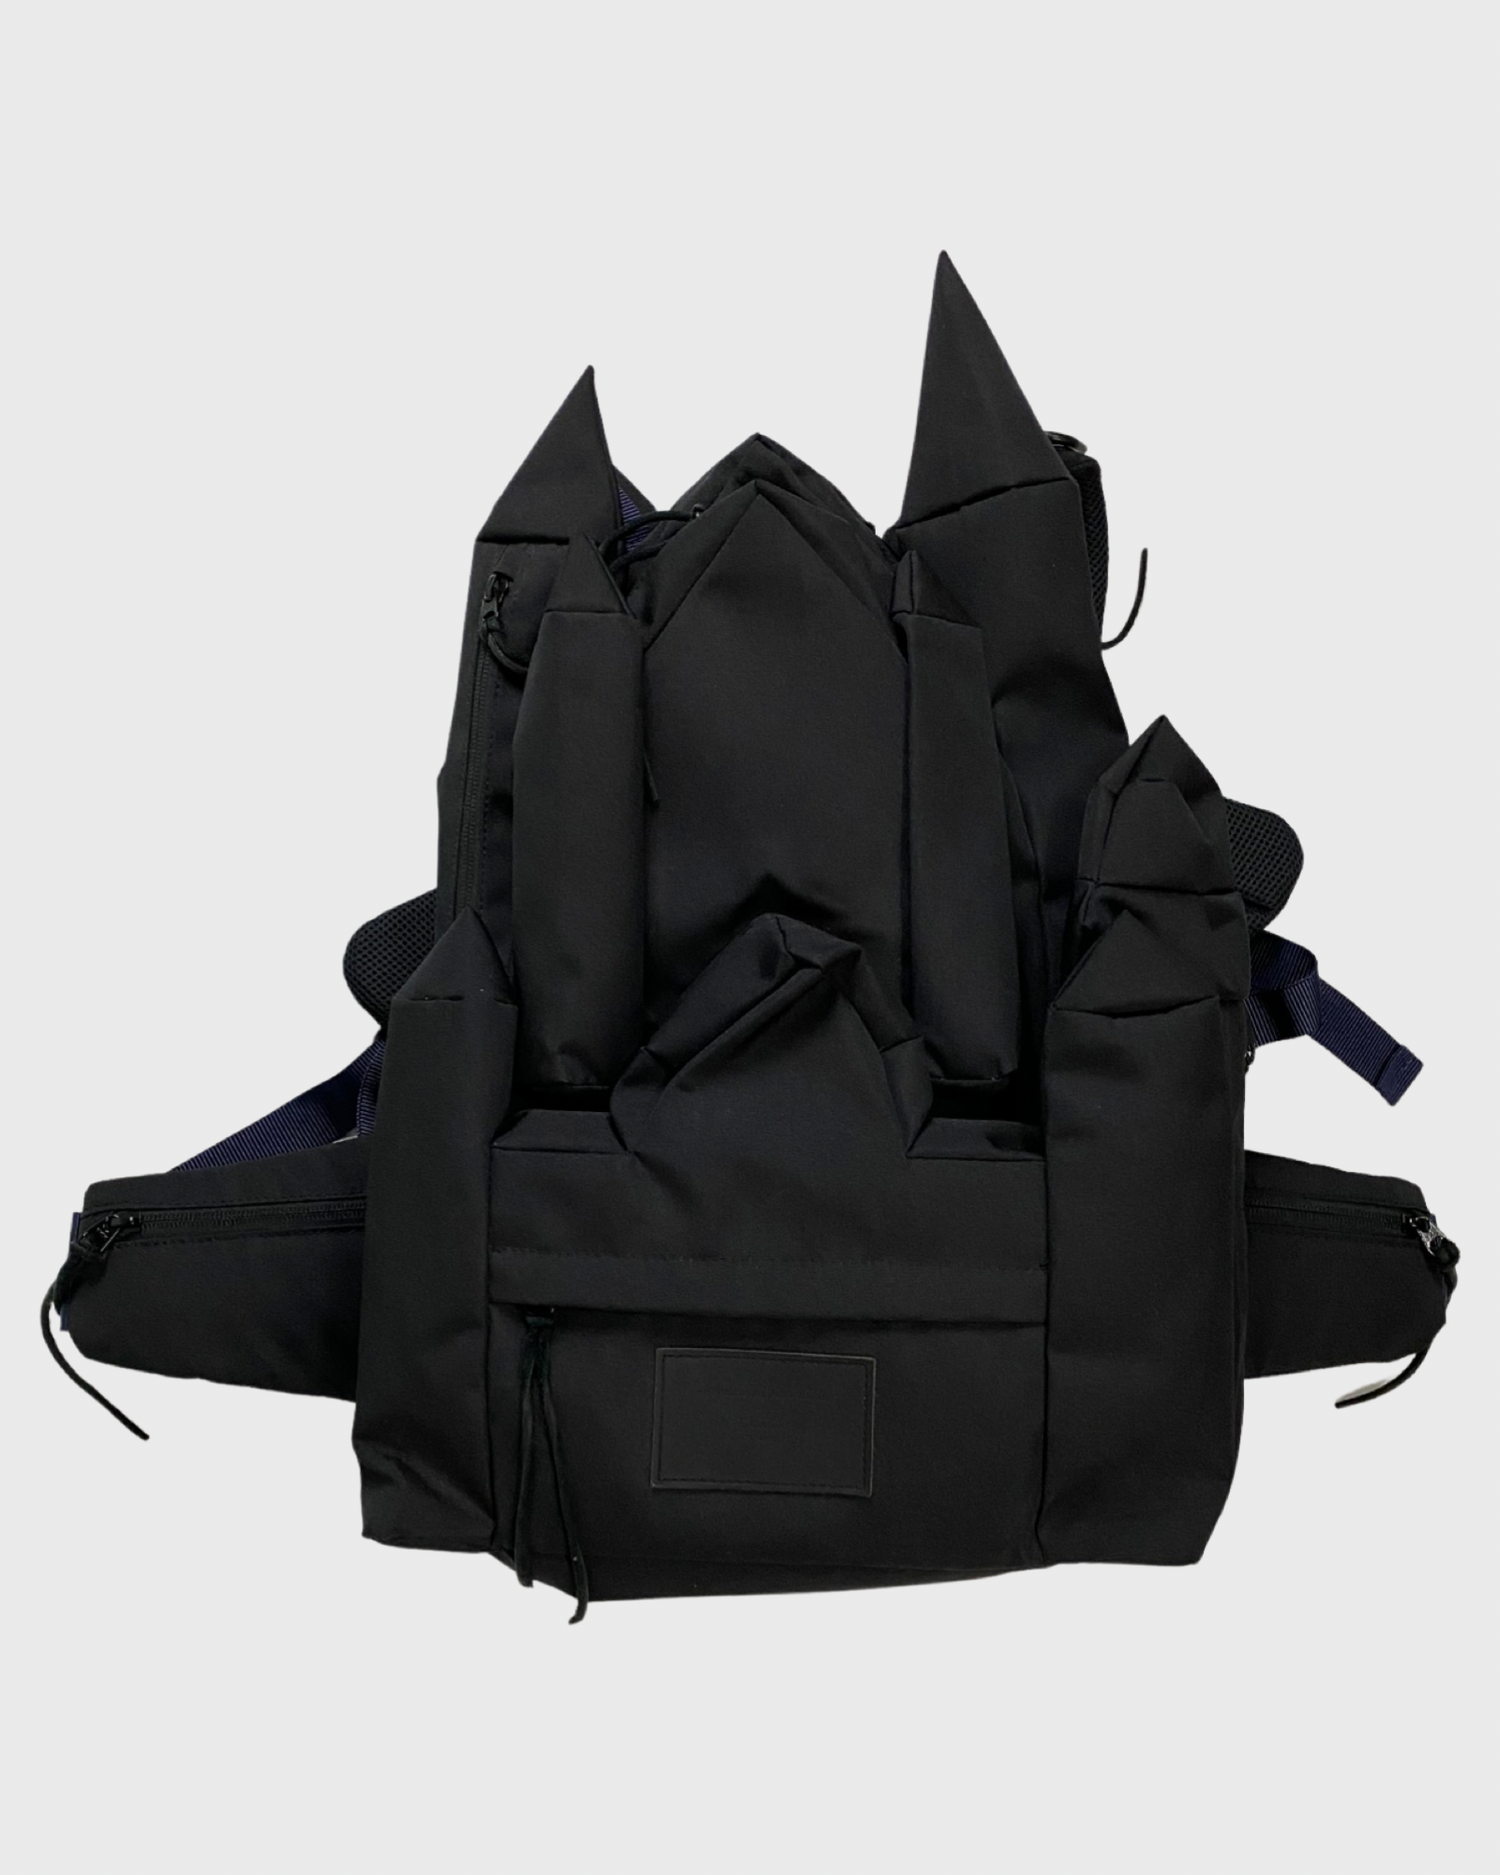 UNDERCOVER CASTLE BACKPACK TOYKO DSM GINZA EXCLUSIVE ALL BLACK VERSION SZ:OS